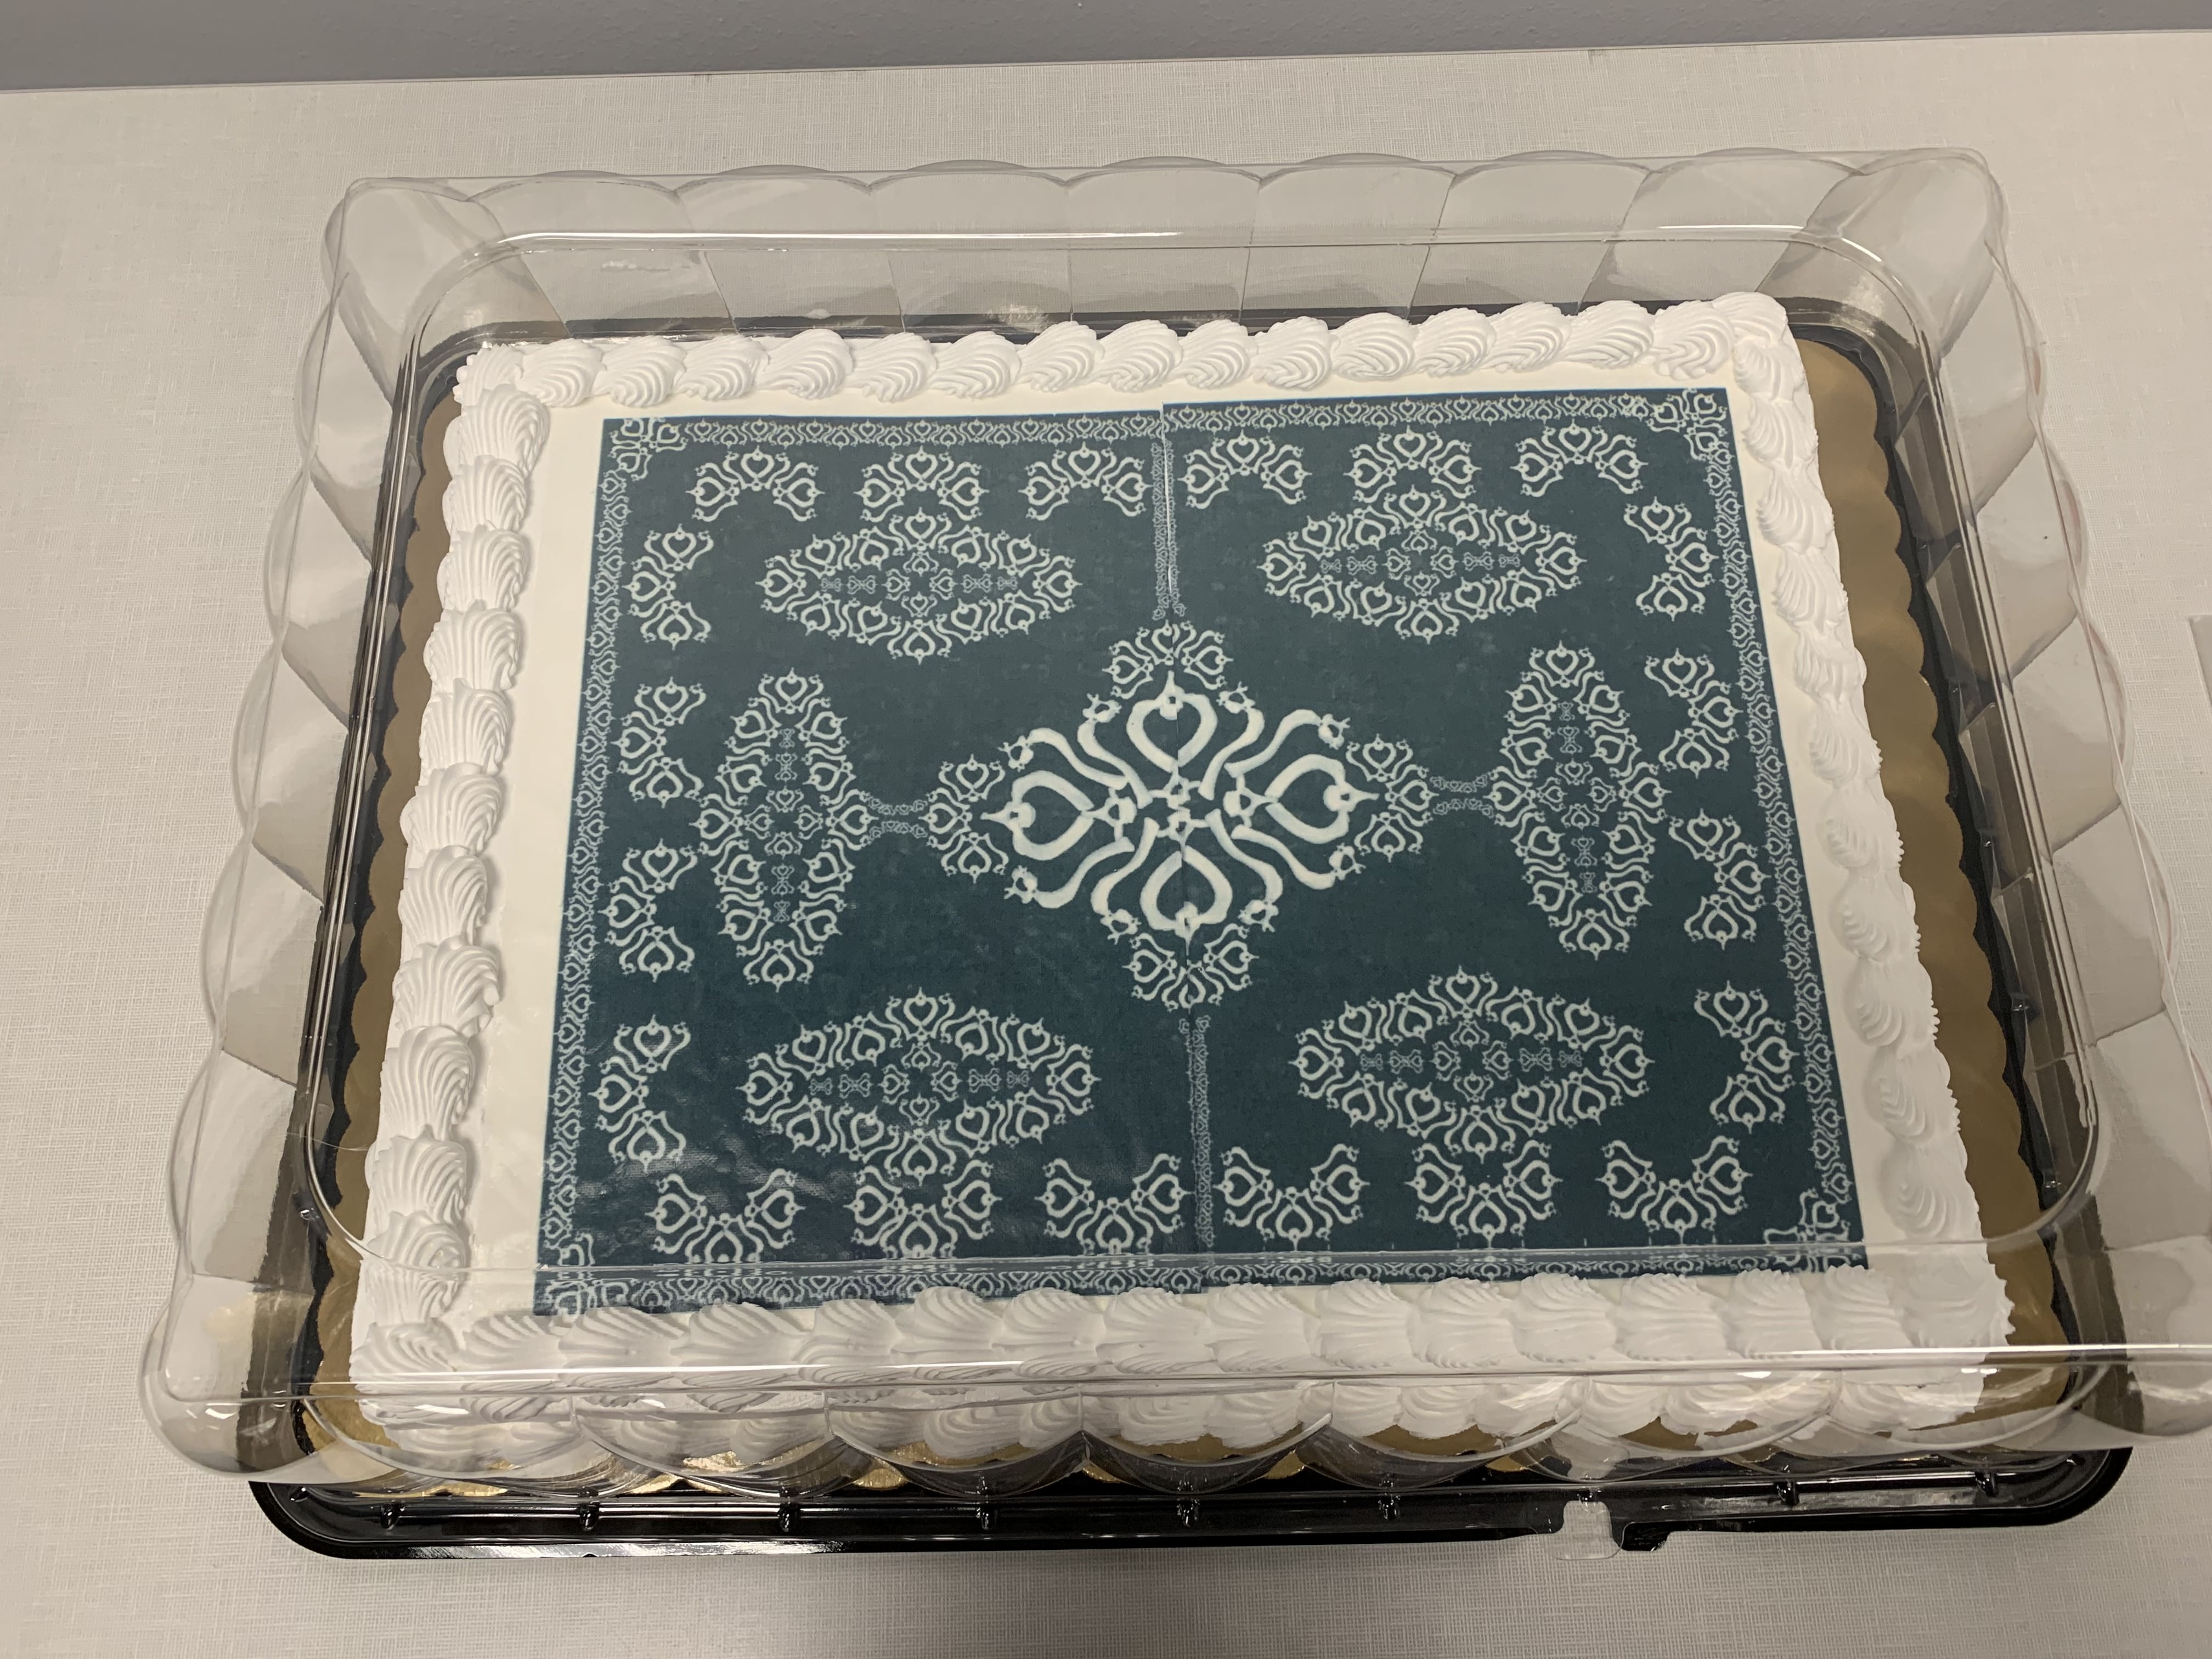 A cake with an artistic pattern made from repeating bone patterns